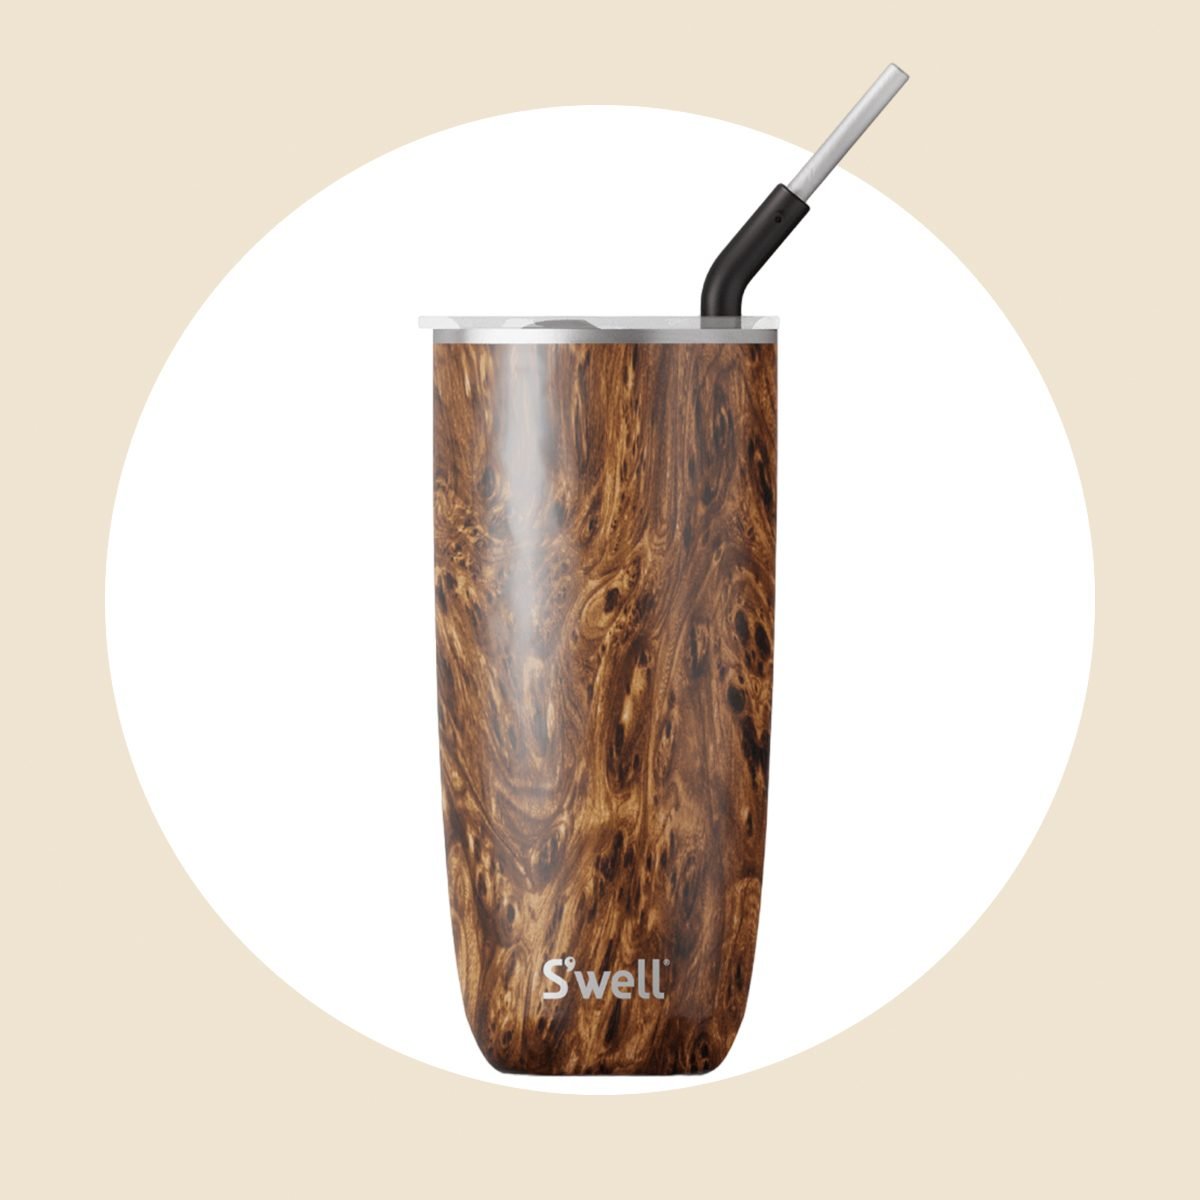 https://www.tasteofhome.com/wp-content/uploads/2023/04/Swell-Tumbler-with-Straw_ecomm_via-swell.com_.jpg?fit=700%2C700